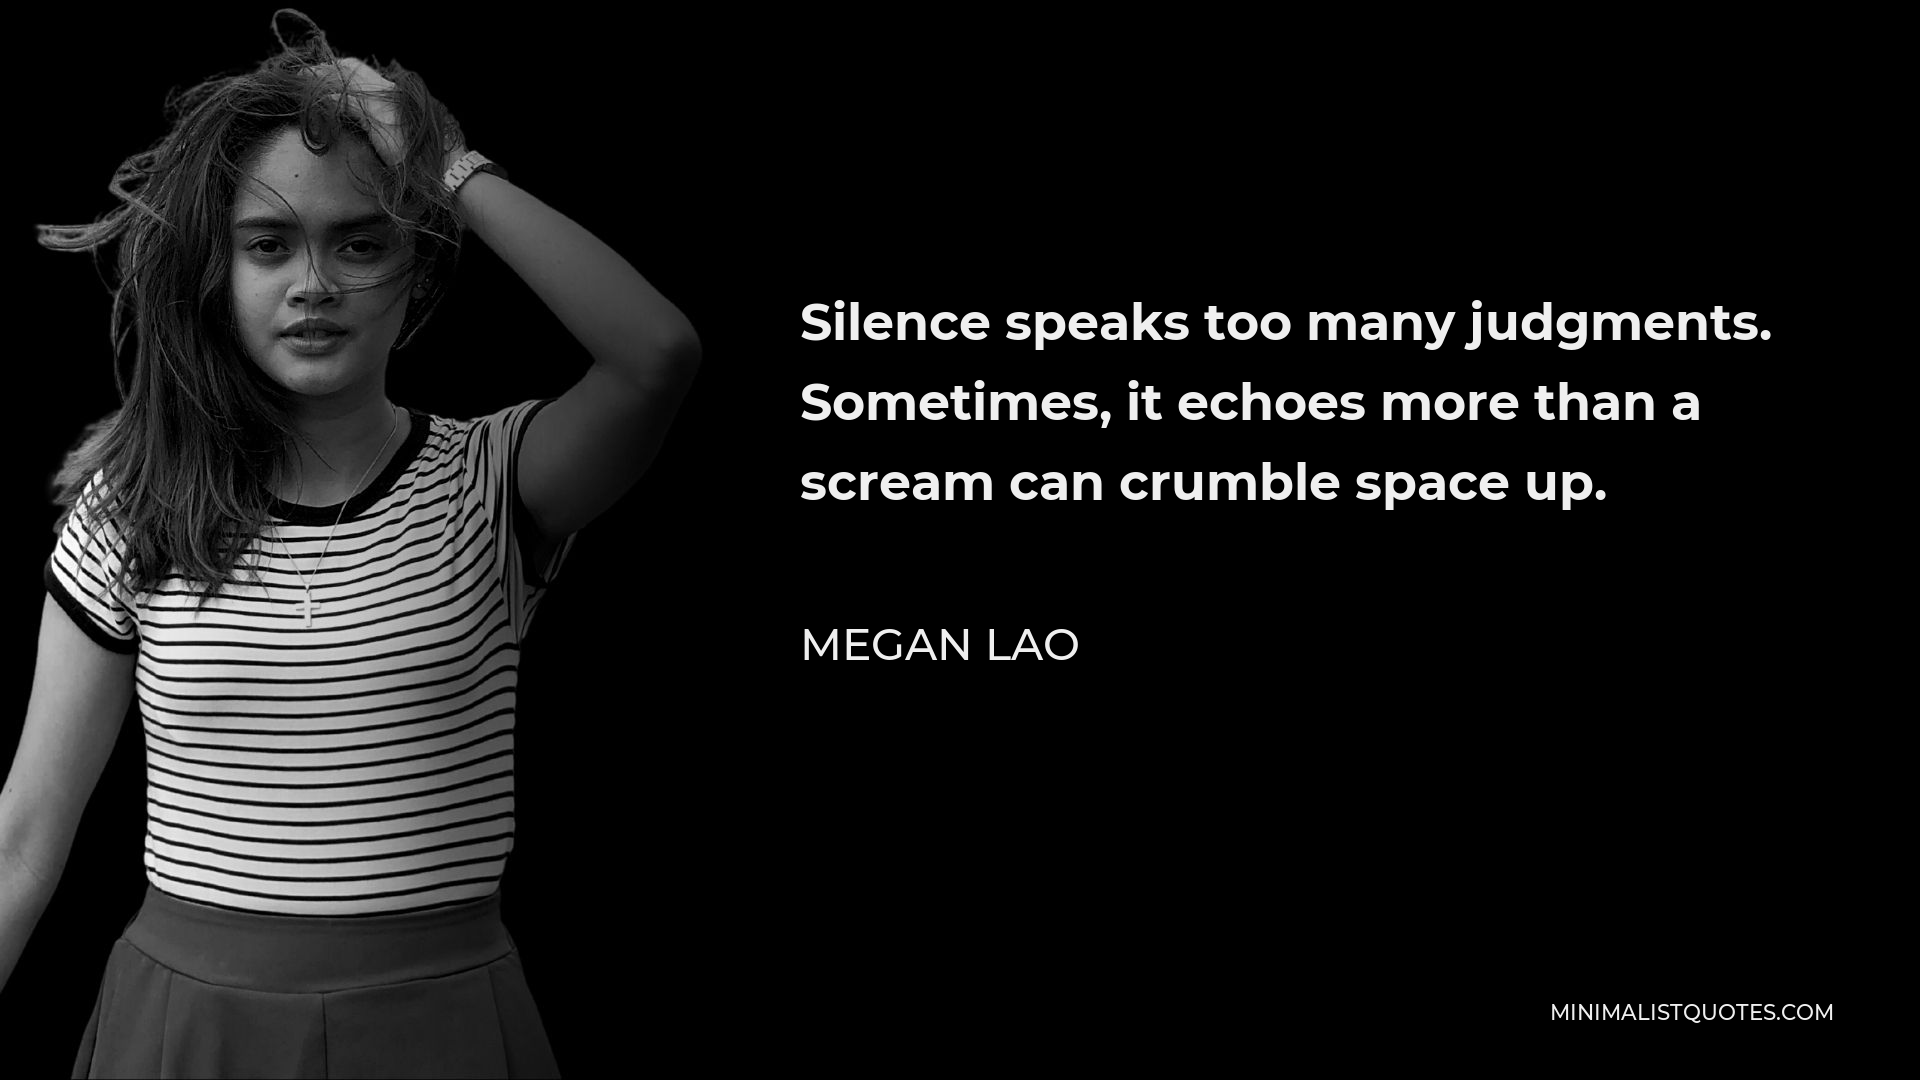 Megan Lao Quote - Silence speaks too many judgments. Sometimes, it echoes more than a scream can crumble space up.